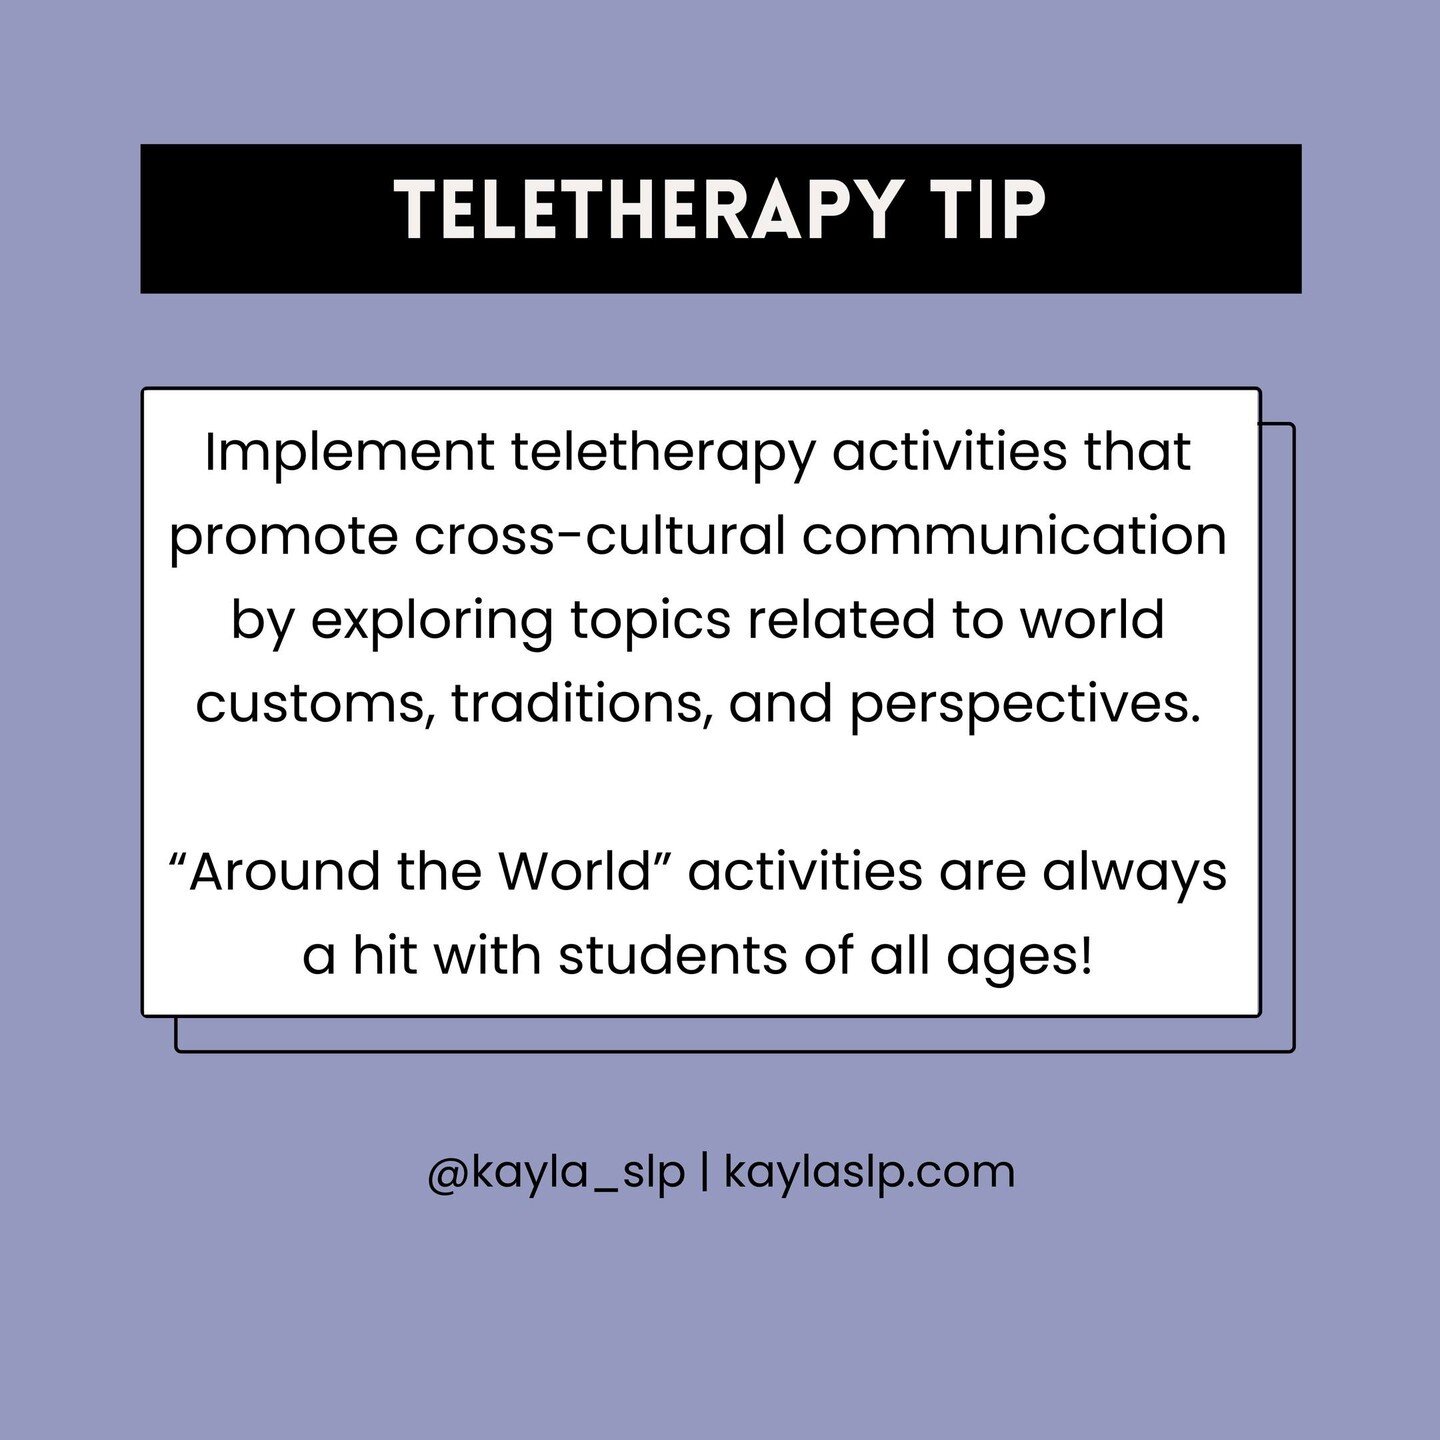 Ditch the passport and grab your devices! Explore the world's diverse cultures, traditions, and perspectives from the comfort of your home!⁠
⁠
Engage your students in teletherapy activities that foster cross-cultural communication and broaden their g